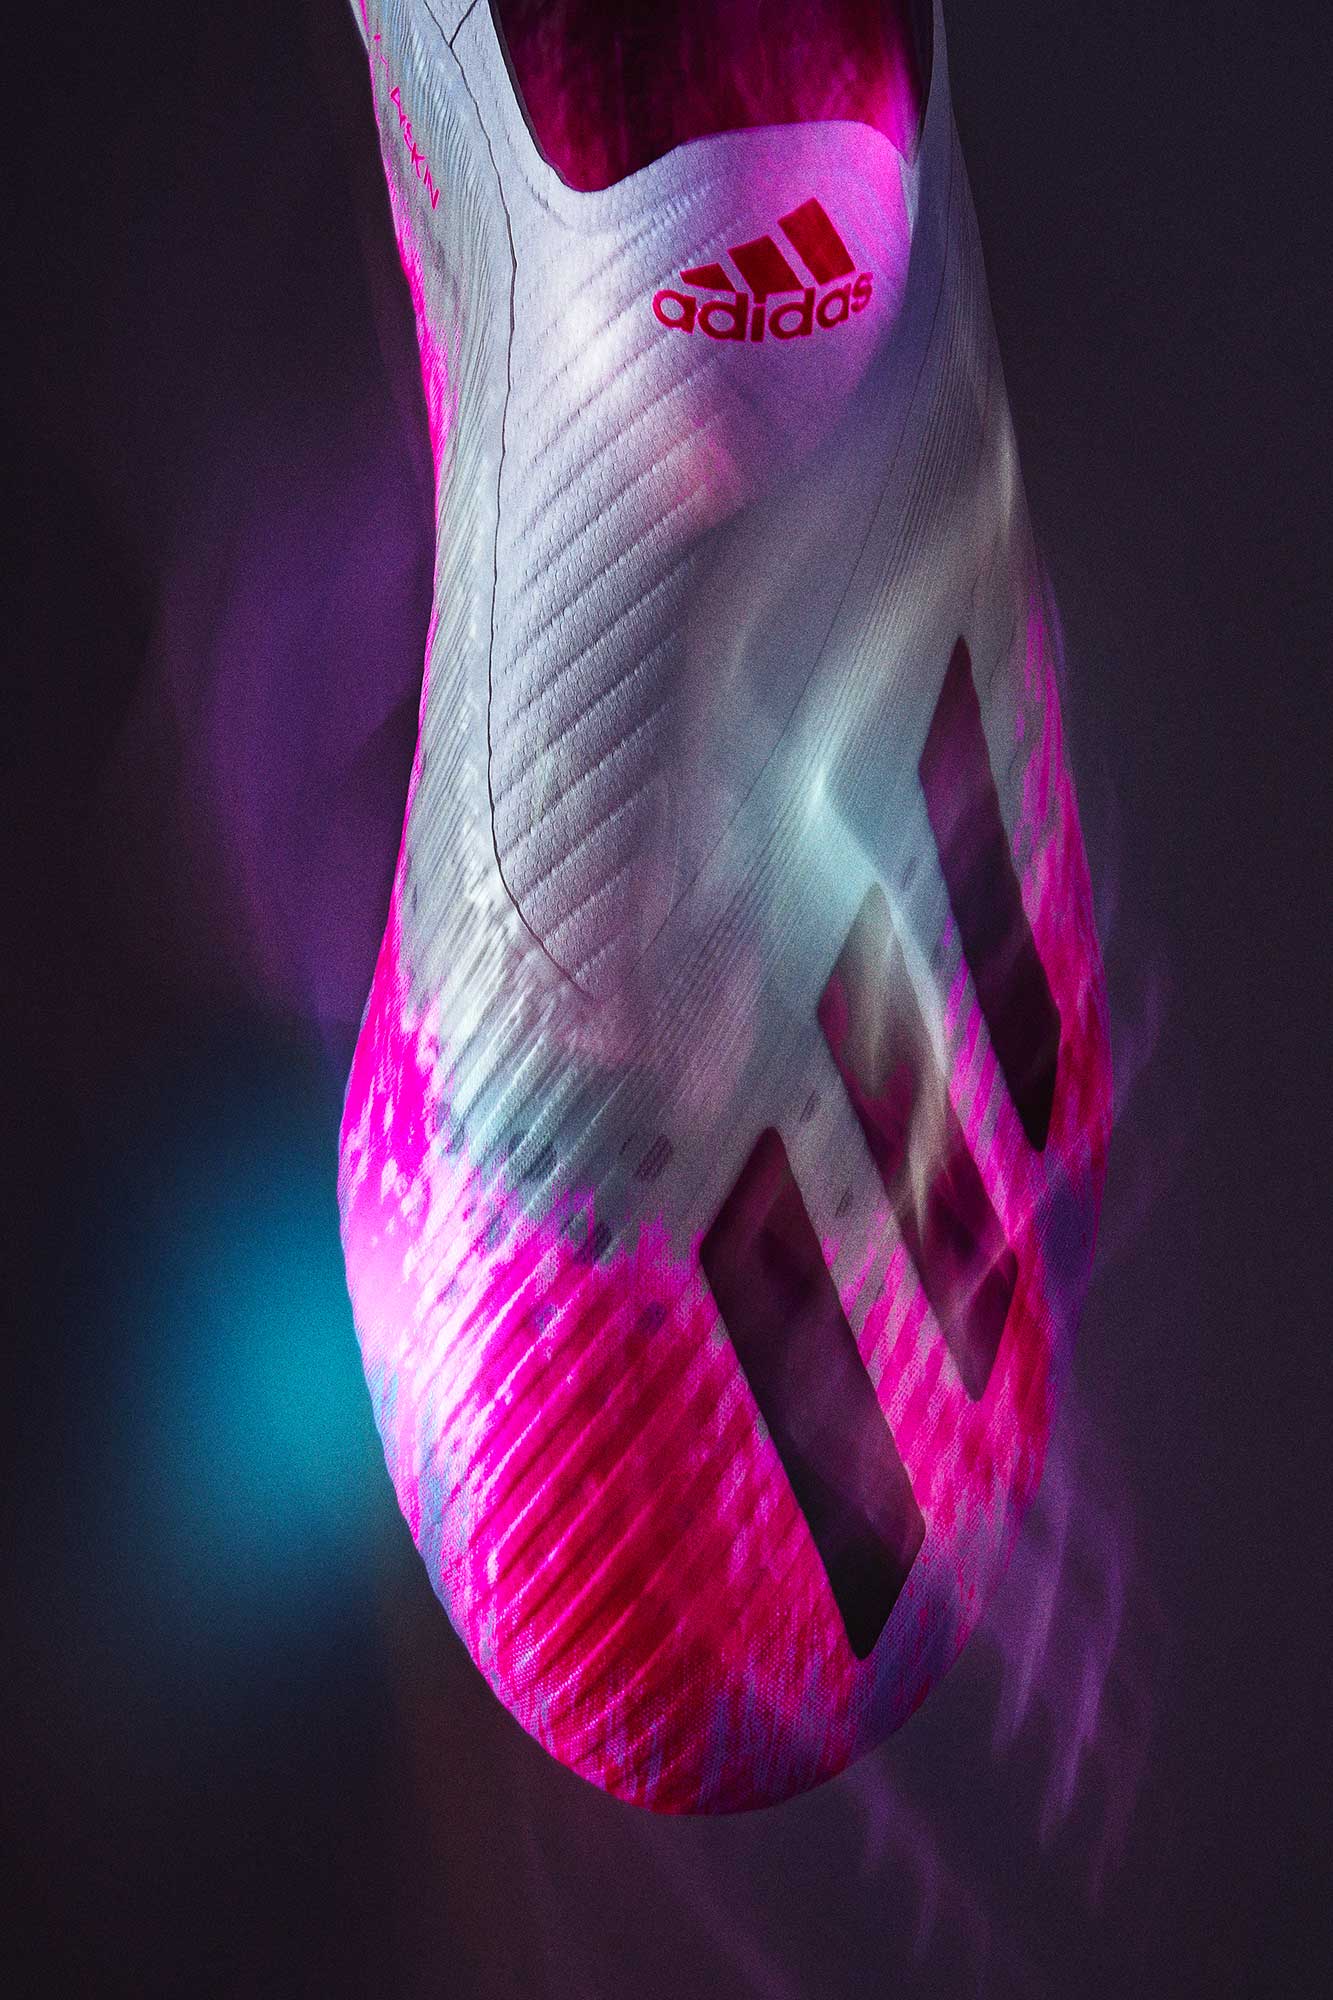 pink adidas football boot commercially photographed in studio using motion blur to create a story of speed and agility